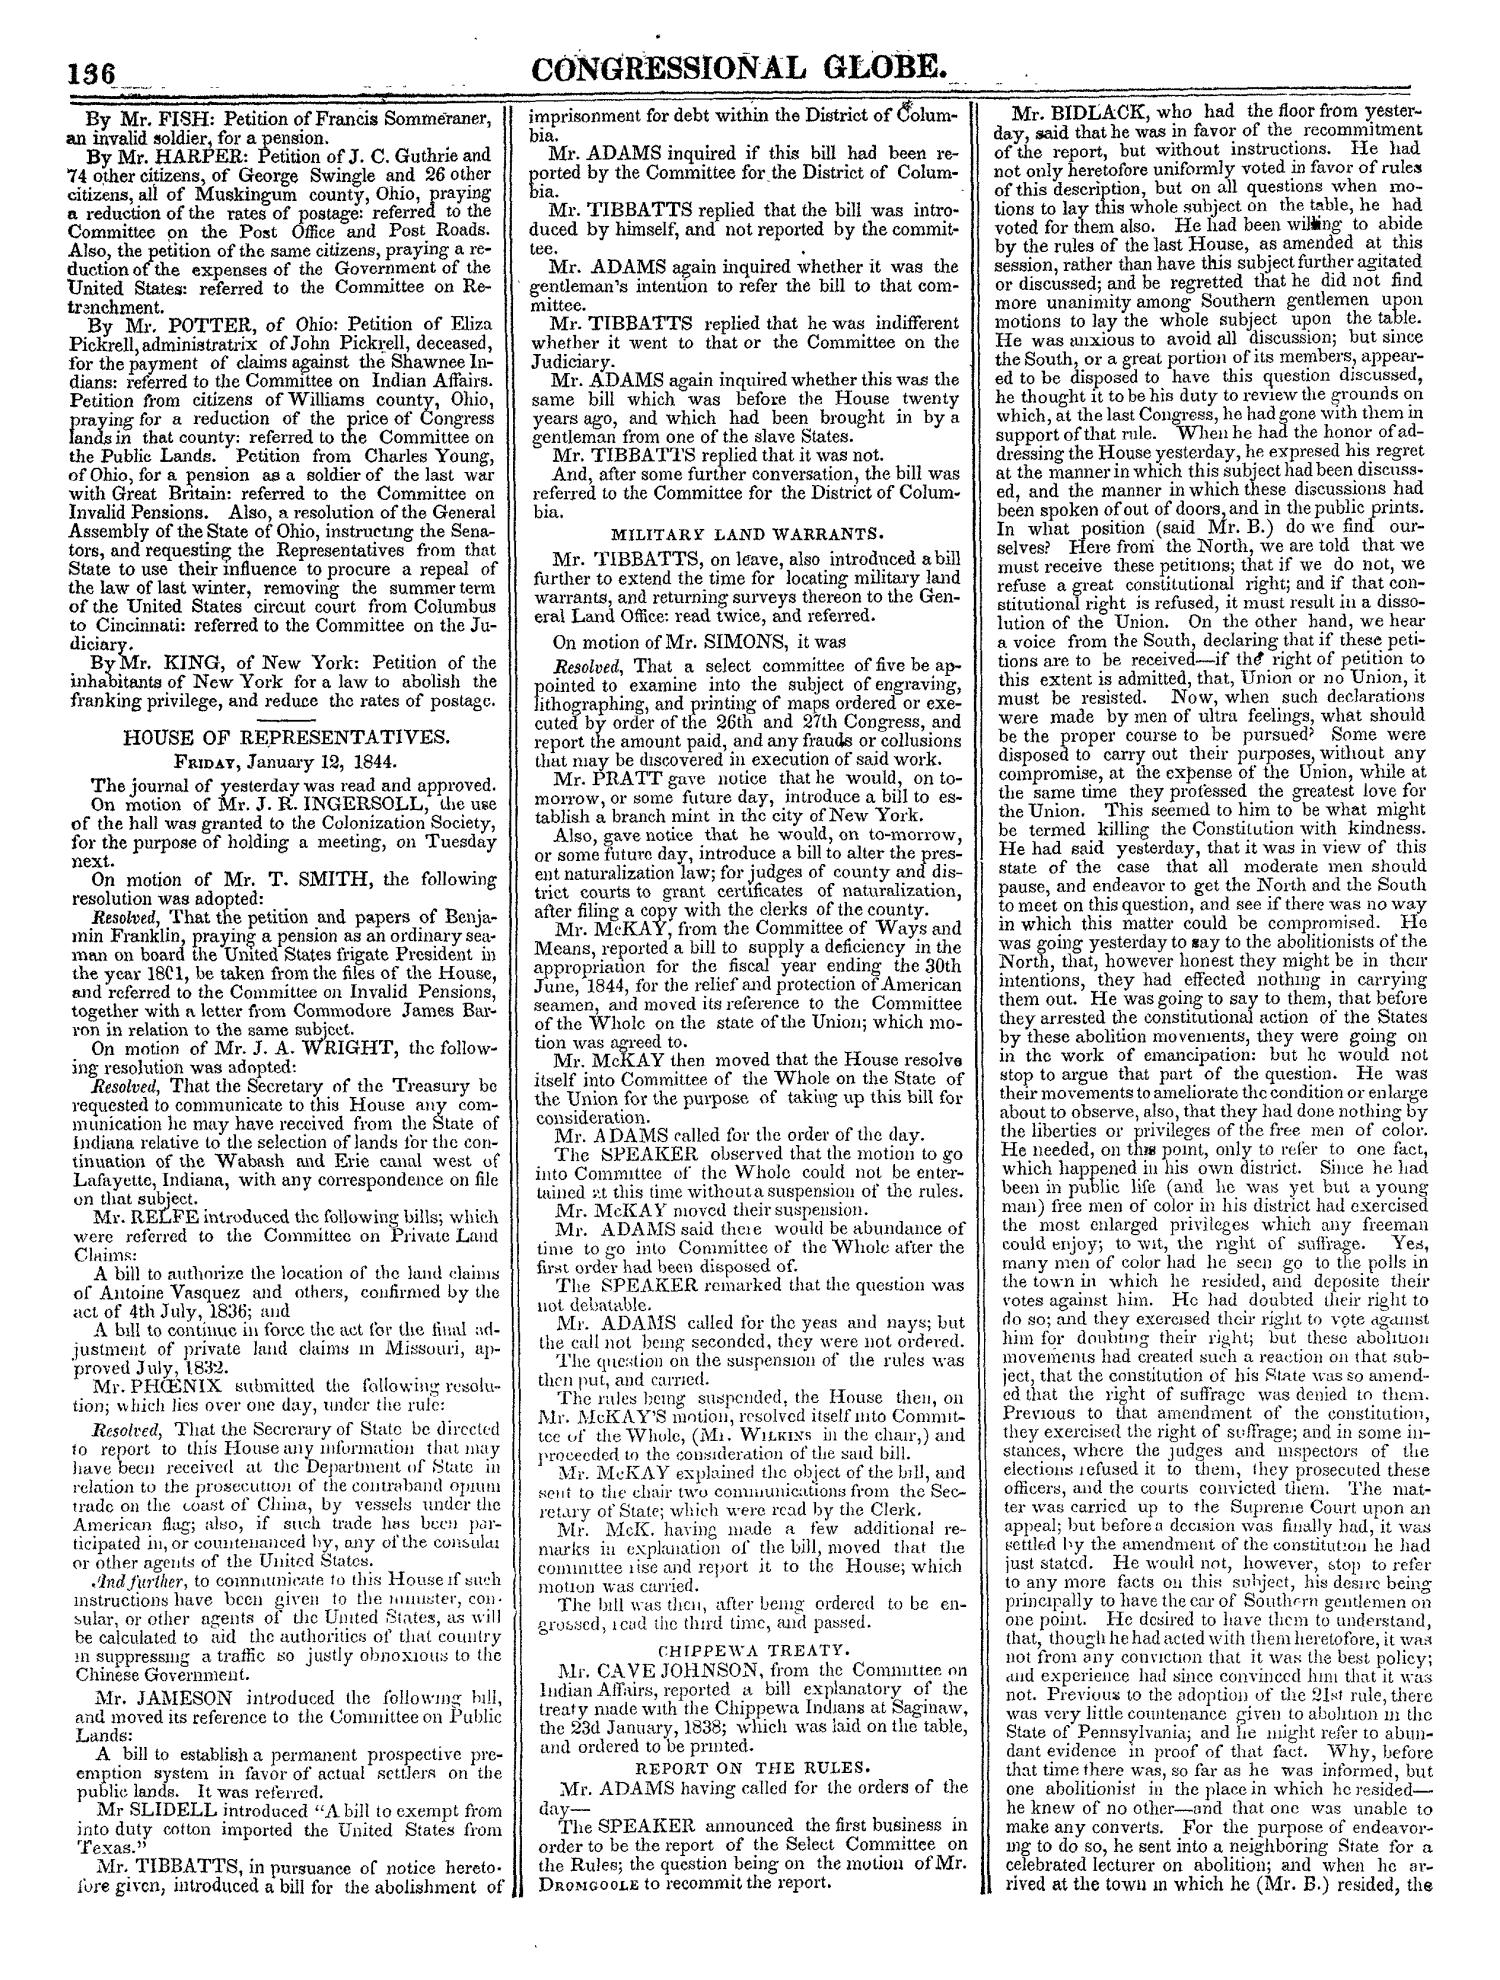 The Congressional Globe, Volume 13, Part 1: Twenty-Eighth Congress, First Session
                                                
                                                    136
                                                